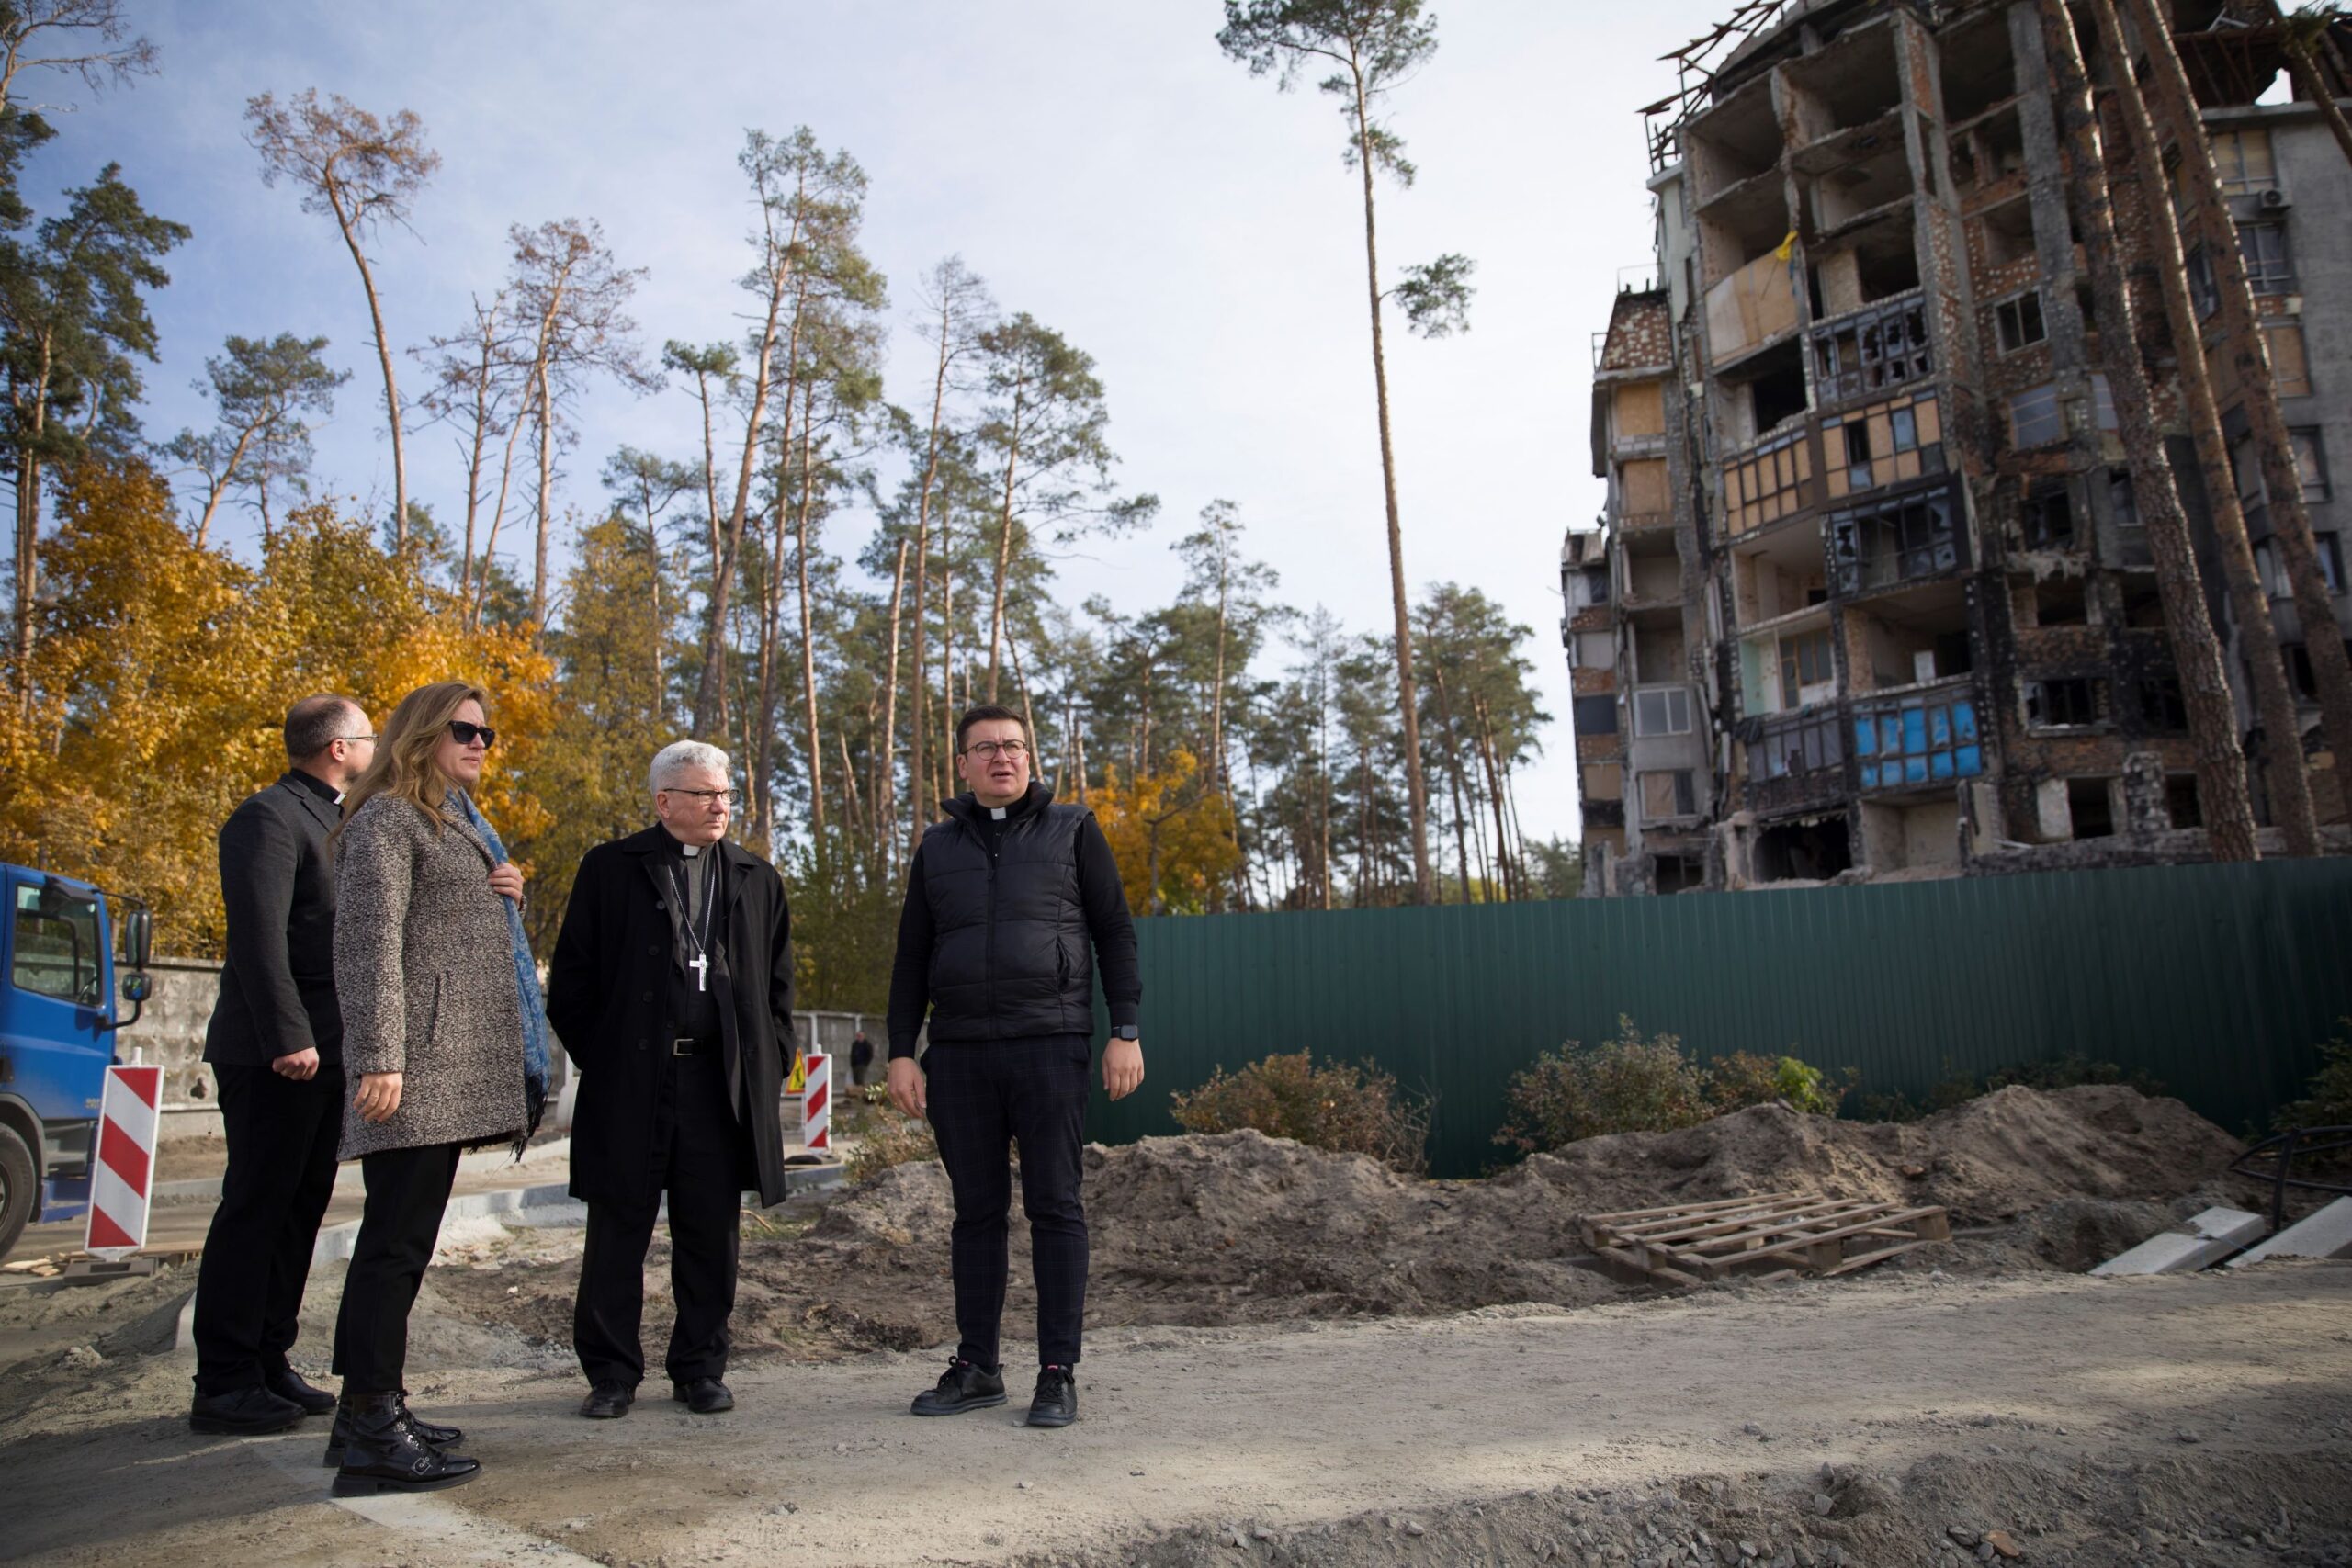 U.S. Bishop Jeffrey M. Monforton, second right, surveys the damage to a residential apartment building in Irpin, a surburb of Kyiv, Ukraine, with representatives of the Ukrainian Greek Catholic Church and Caritas Ukraine during a personal visit to the war-torn nation Oct. 18-22, 2023. Bishop Monforton, former head of the Diocese of Steubenville, Ohio, officially began his ministry as the newest auxiliary bishop of the Archdiocese of Detroit Nov. 7. (OSV News photo/courtesy Ukrainian Greek Catholic Church via Detroit Catholic)